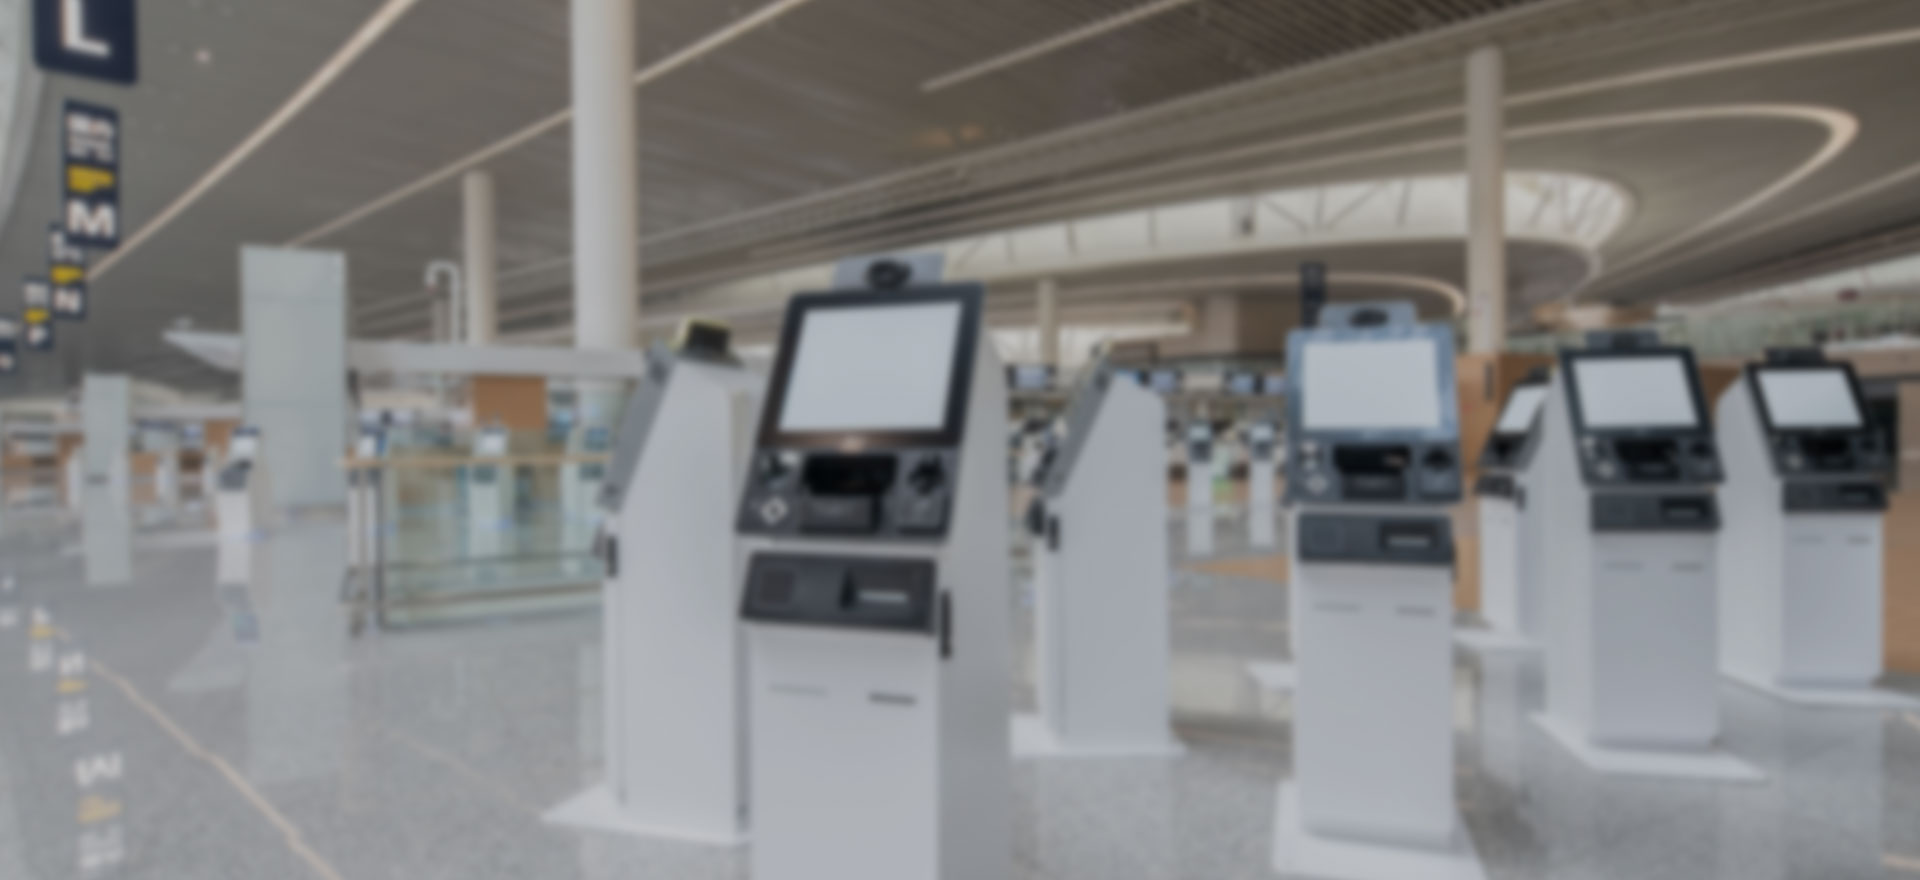 Self Service Checkout Ordering Kiosk Terminals Applications